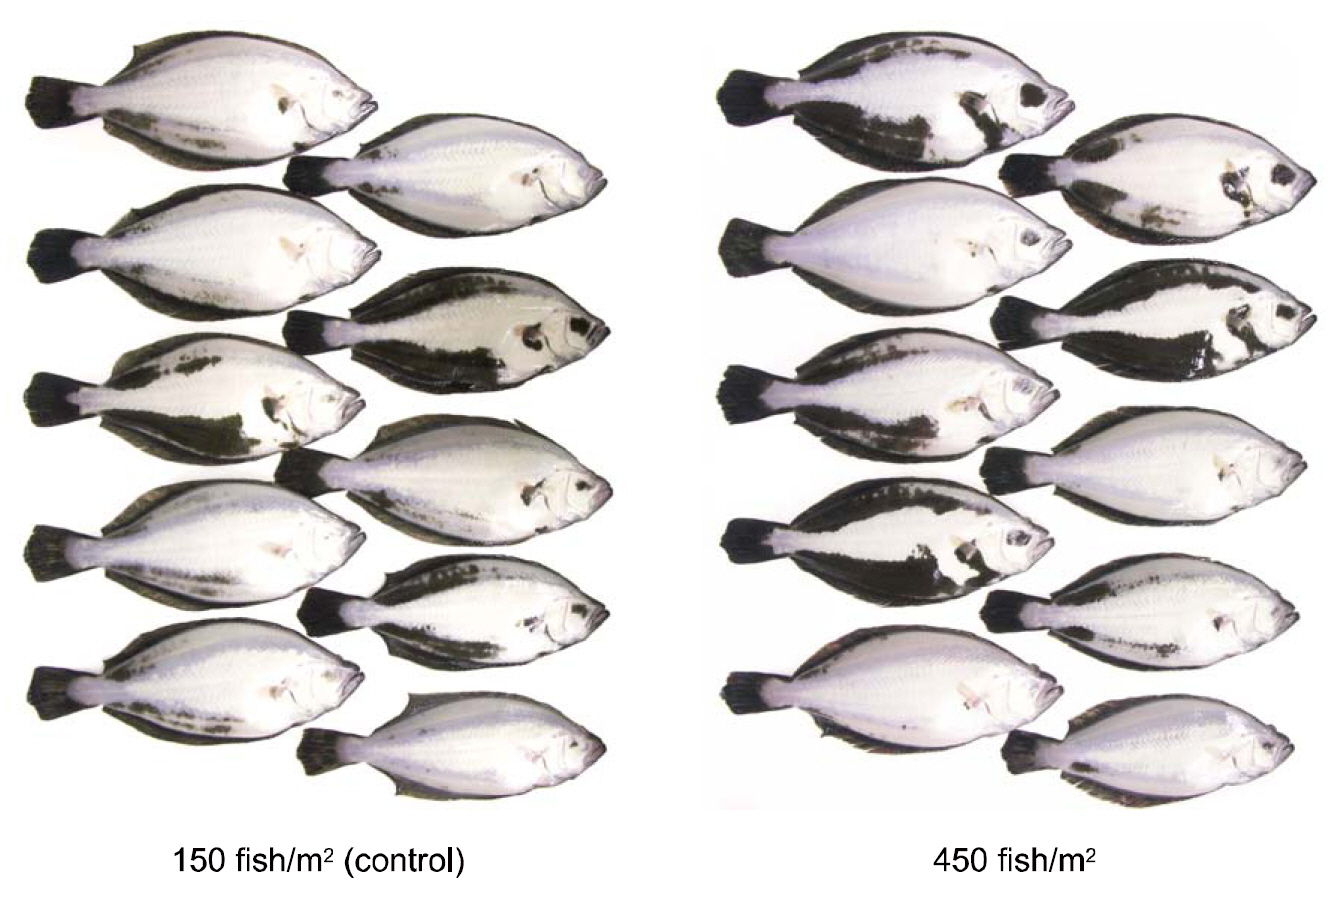 Photographs of the blind side of  fry olive flounders Paralichthys olivaceus reared in two densities for 90 days